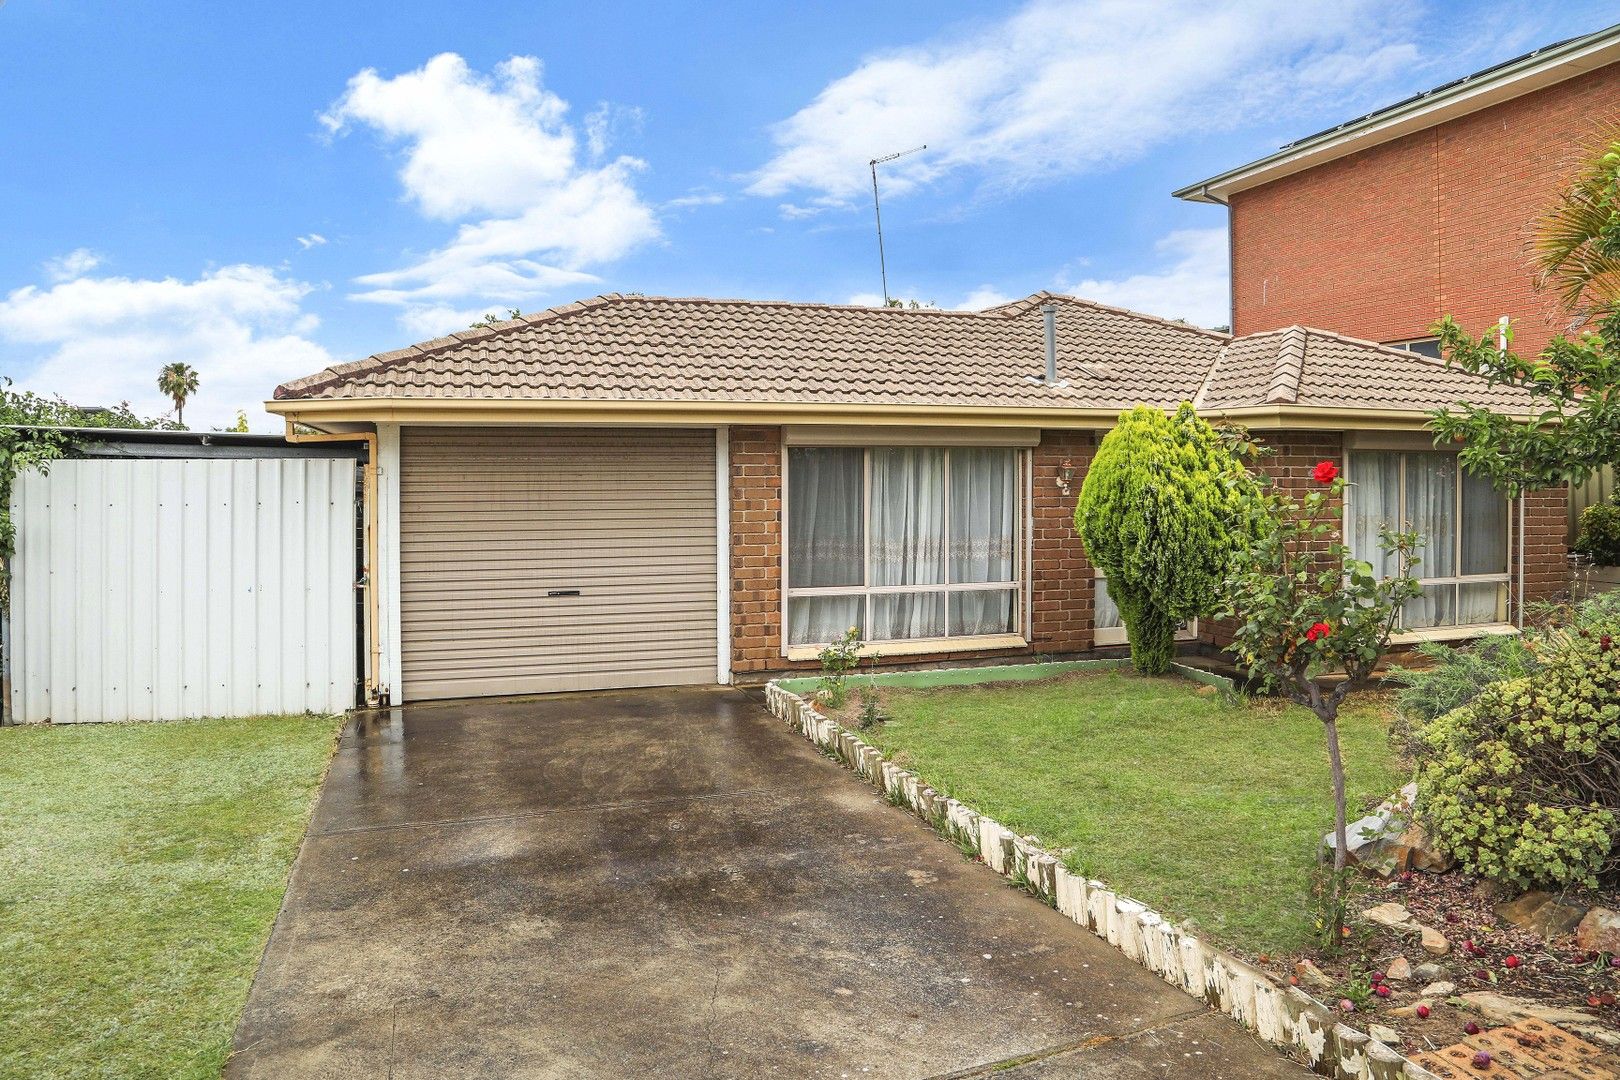 3 bedrooms House in 64 Wynn Vale Drive GULFVIEW HEIGHTS SA, 5096